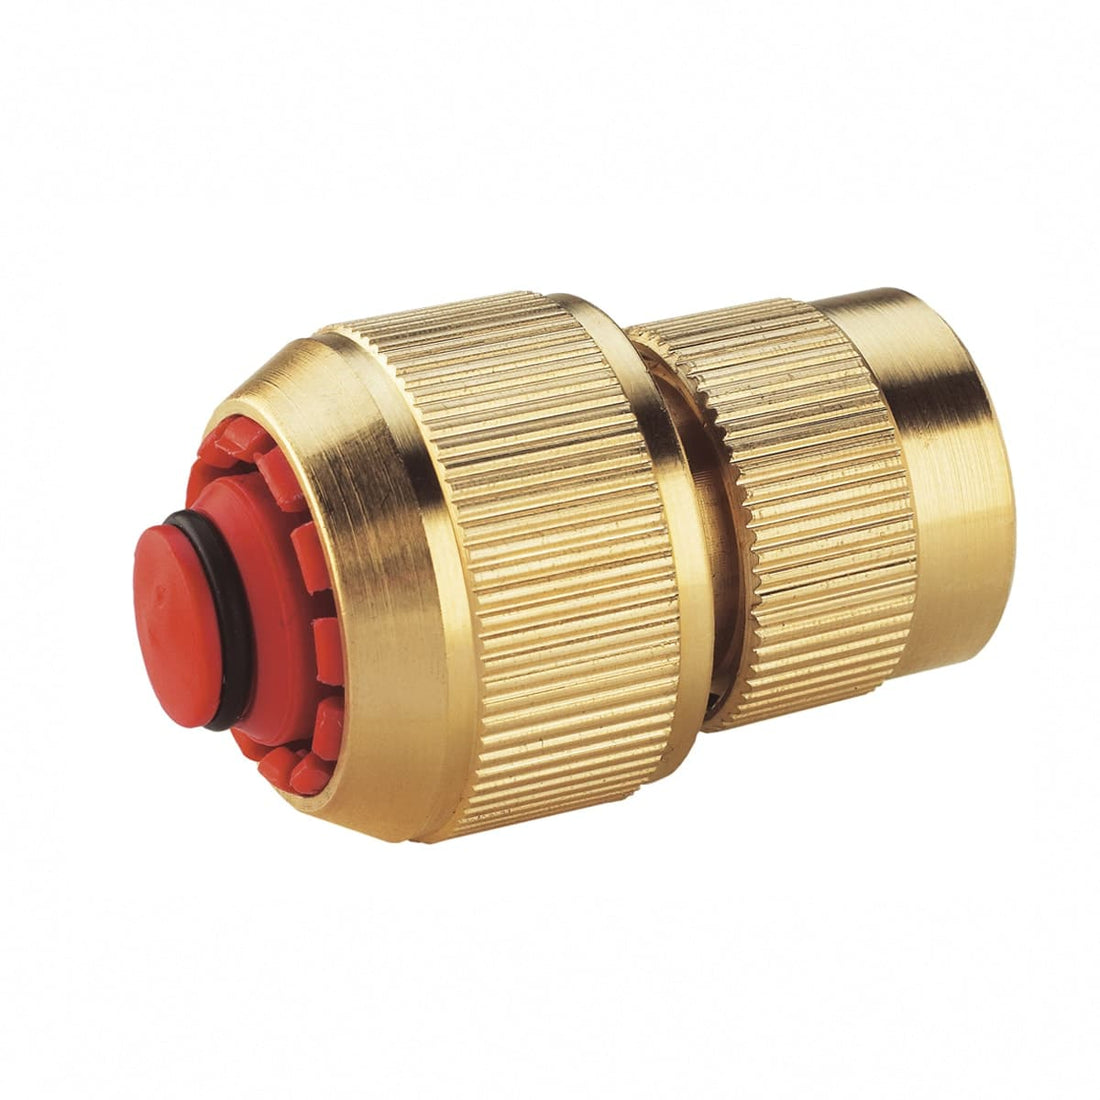 BRASS QUICK COUPLING WITH AQUASTOP FOR 19 MM DIAMETER PIPES COLORTAP